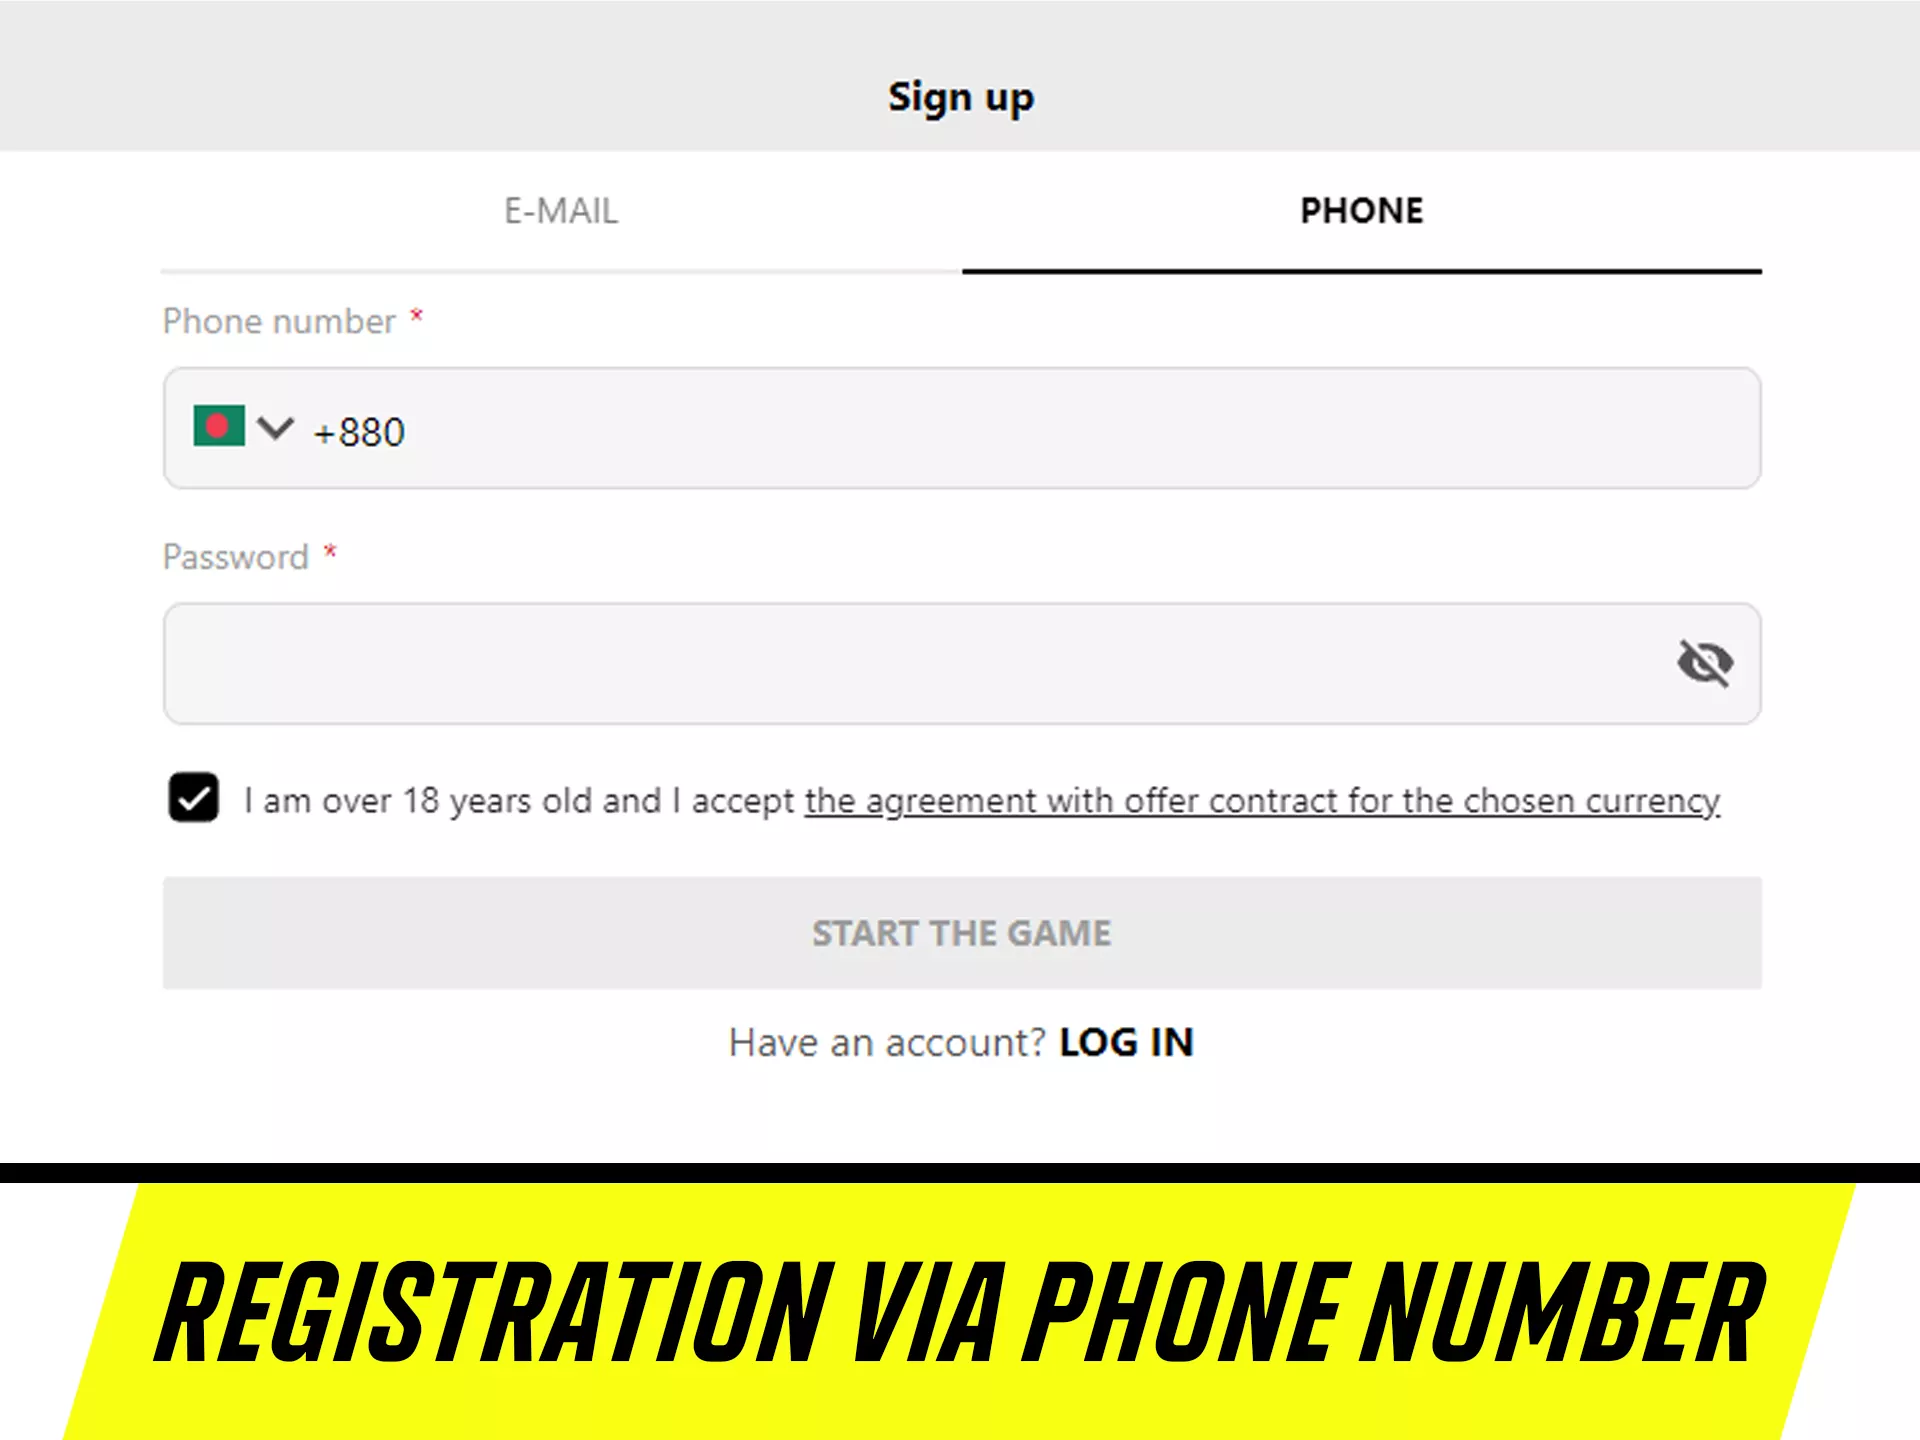 Registrate quickly at Parimatch with your phone number.